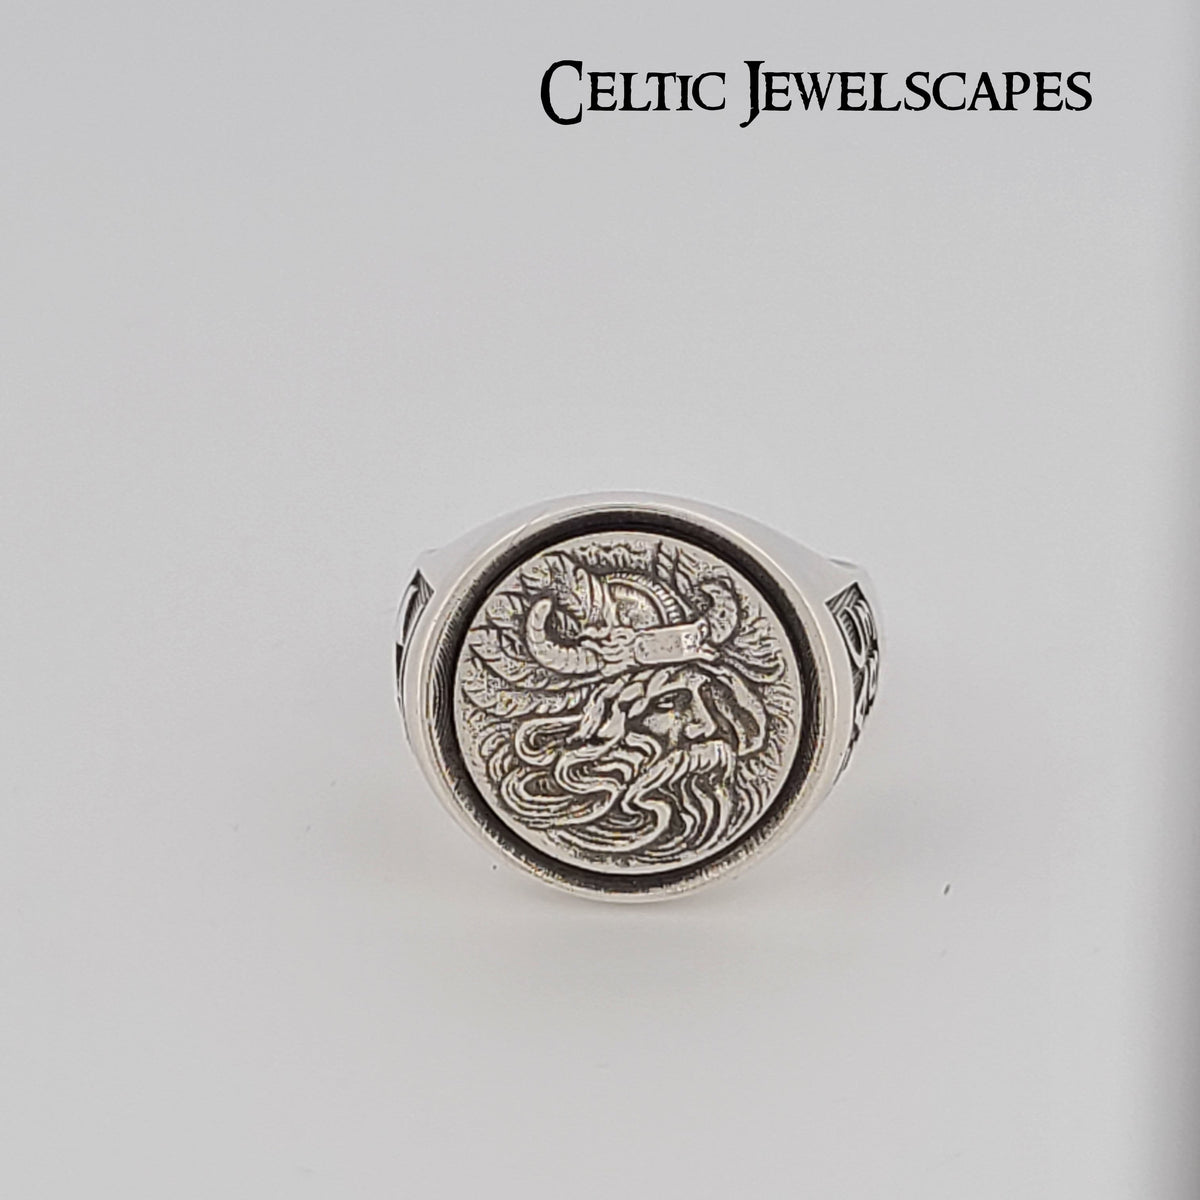 NEW ORDER VIKINGS FAC383 - Sterling Silver $225 (Proceeds to Our Crew!)